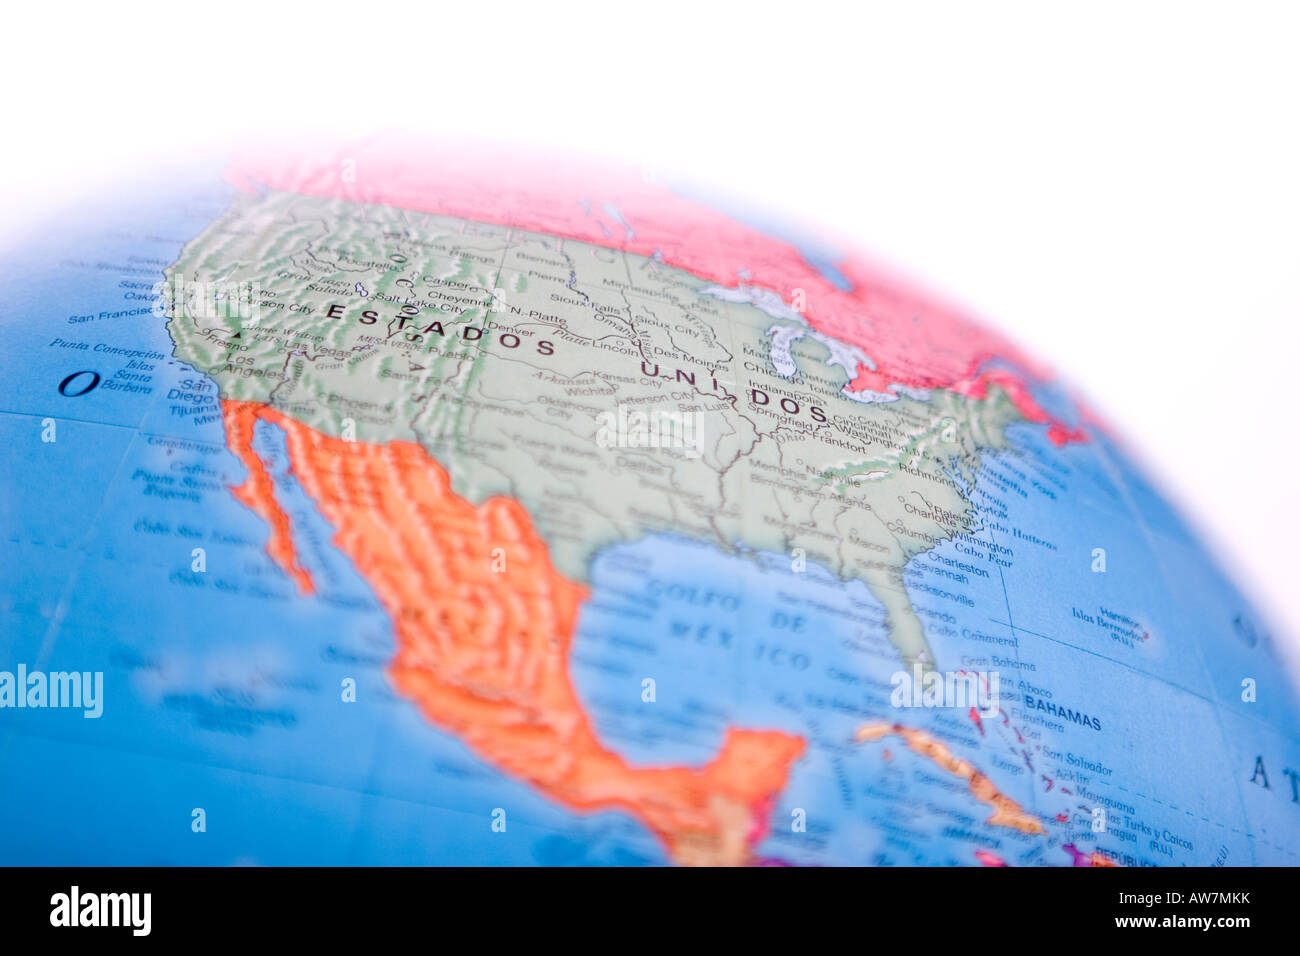 World globe map of North America with shallow depth of field and focus on United States Stock Photo